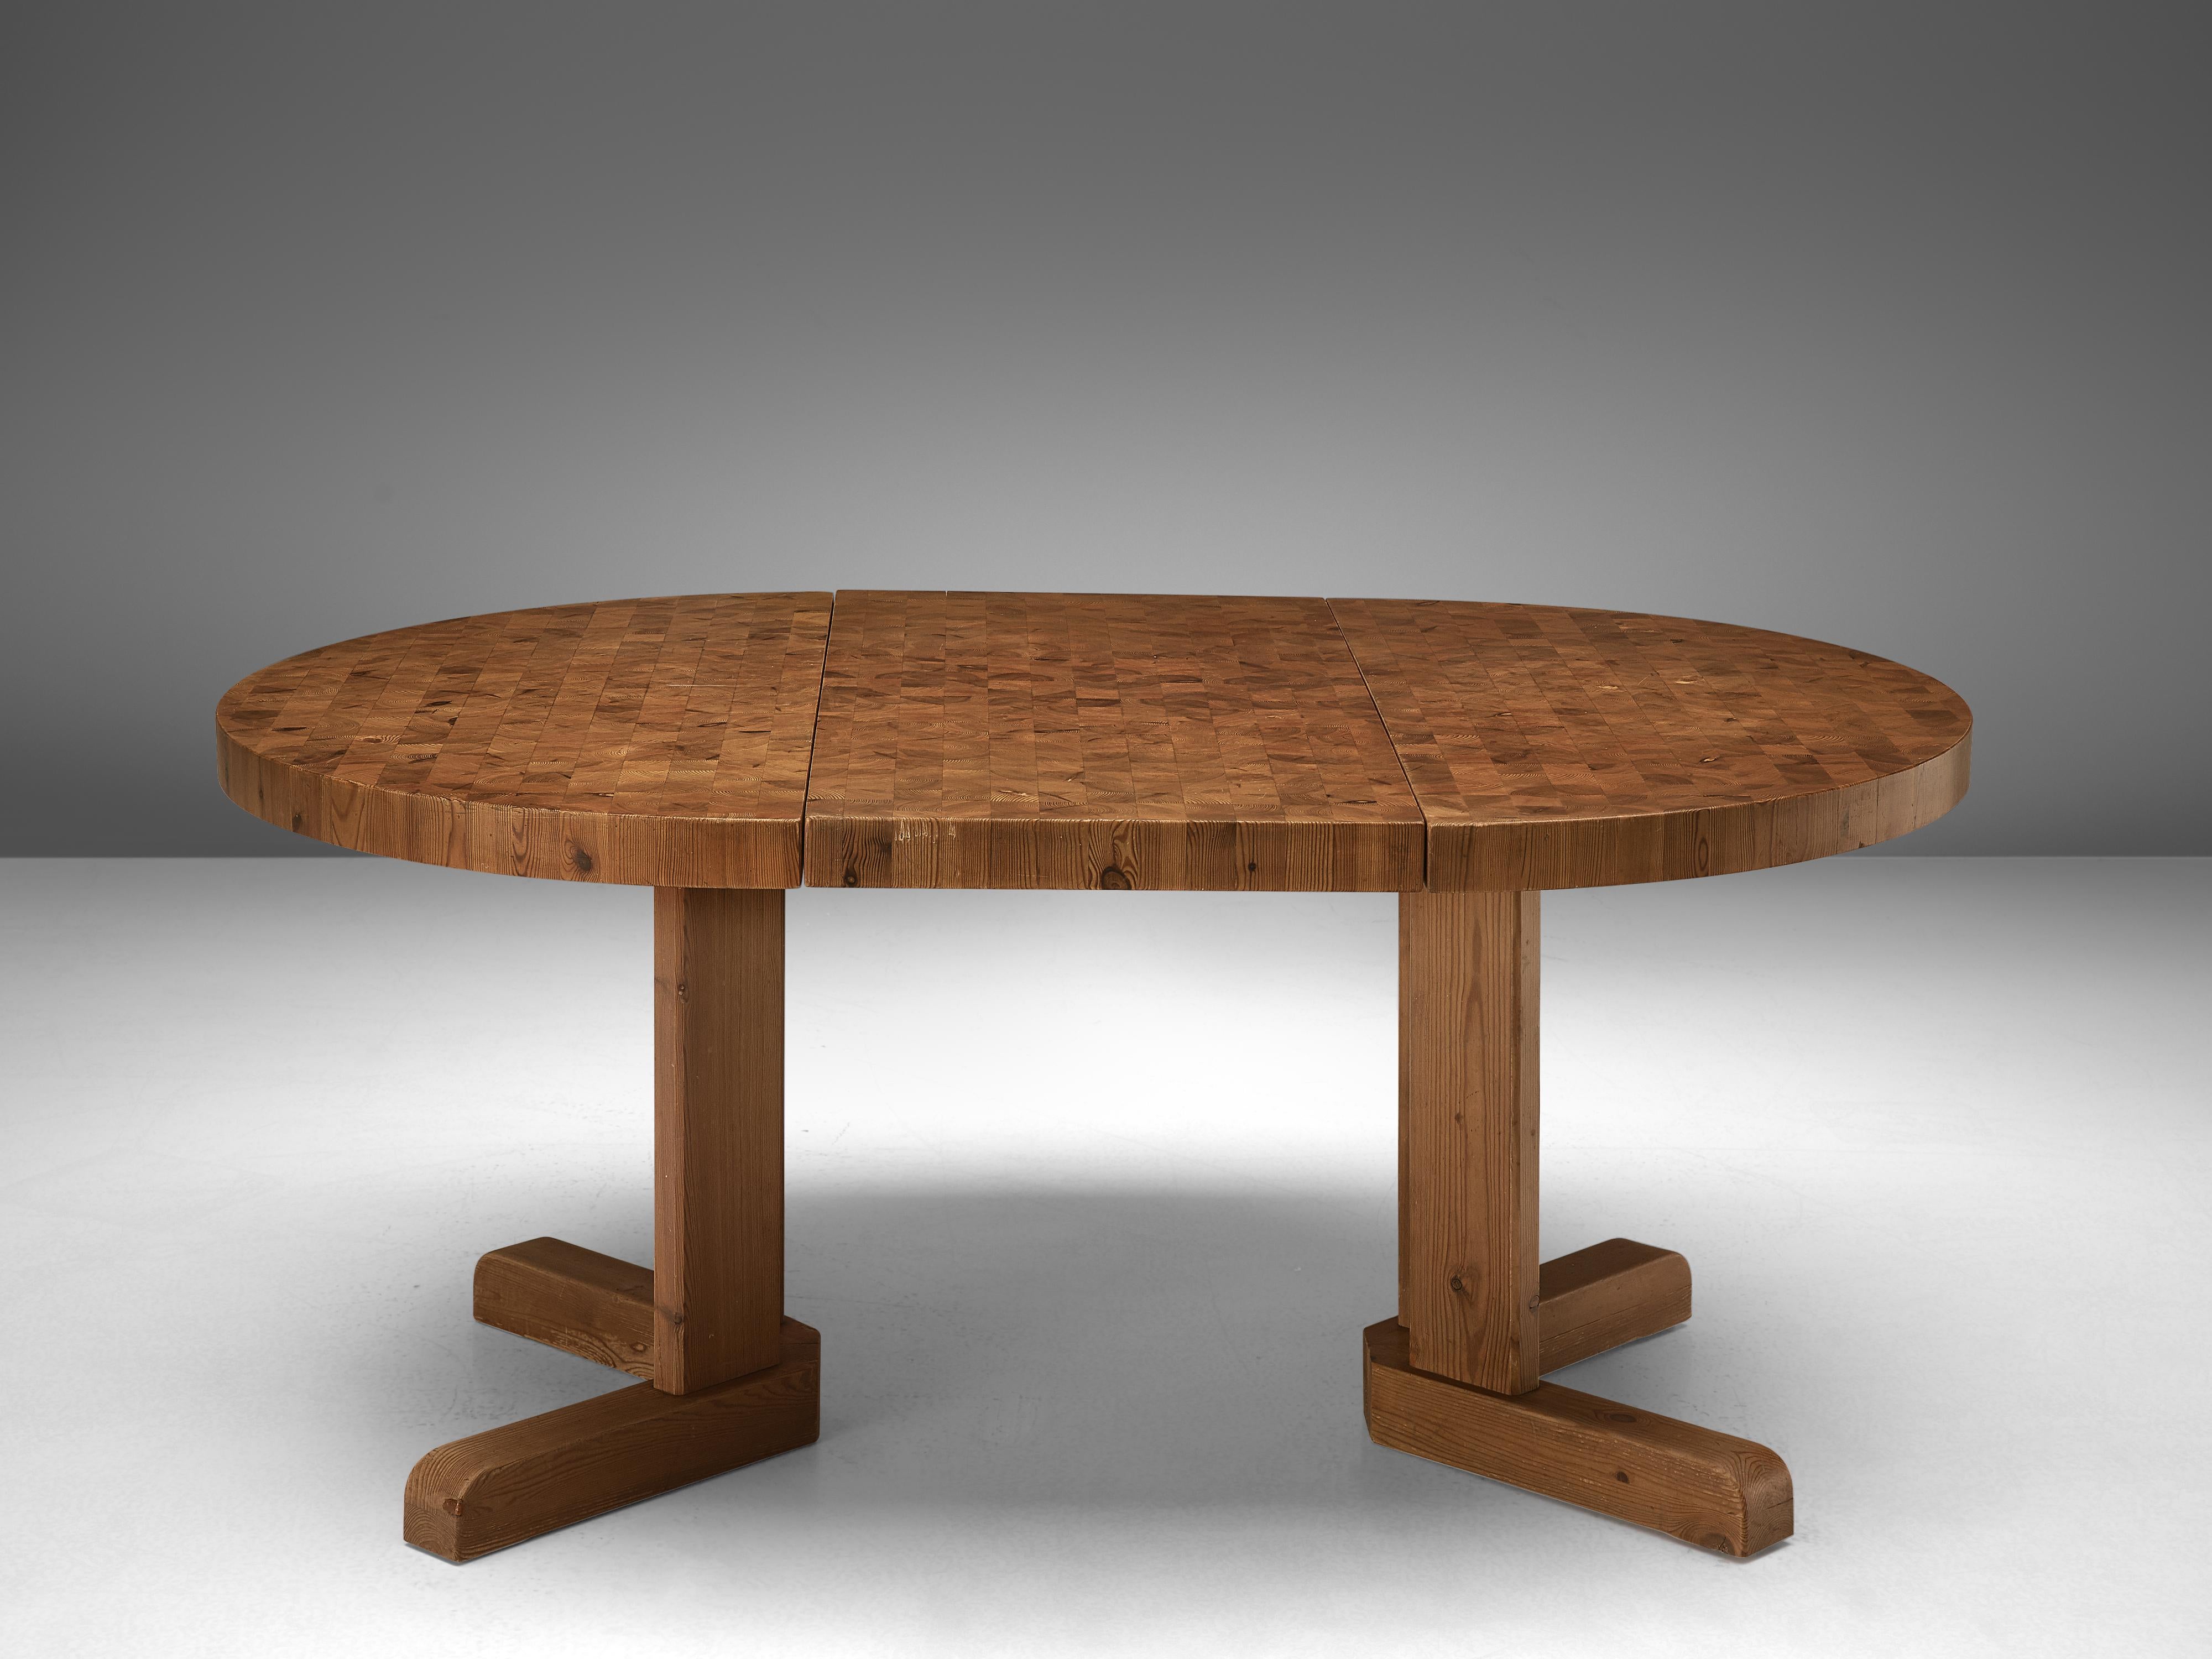 Extendable dining table, solid pinewood, Denmark, 1960s

This extendable dining table features a top executed with end-grain pine wood, which creates a vivid, geometric pattern. The top is extendable with one extra leaf of 50cm (19.7 in).